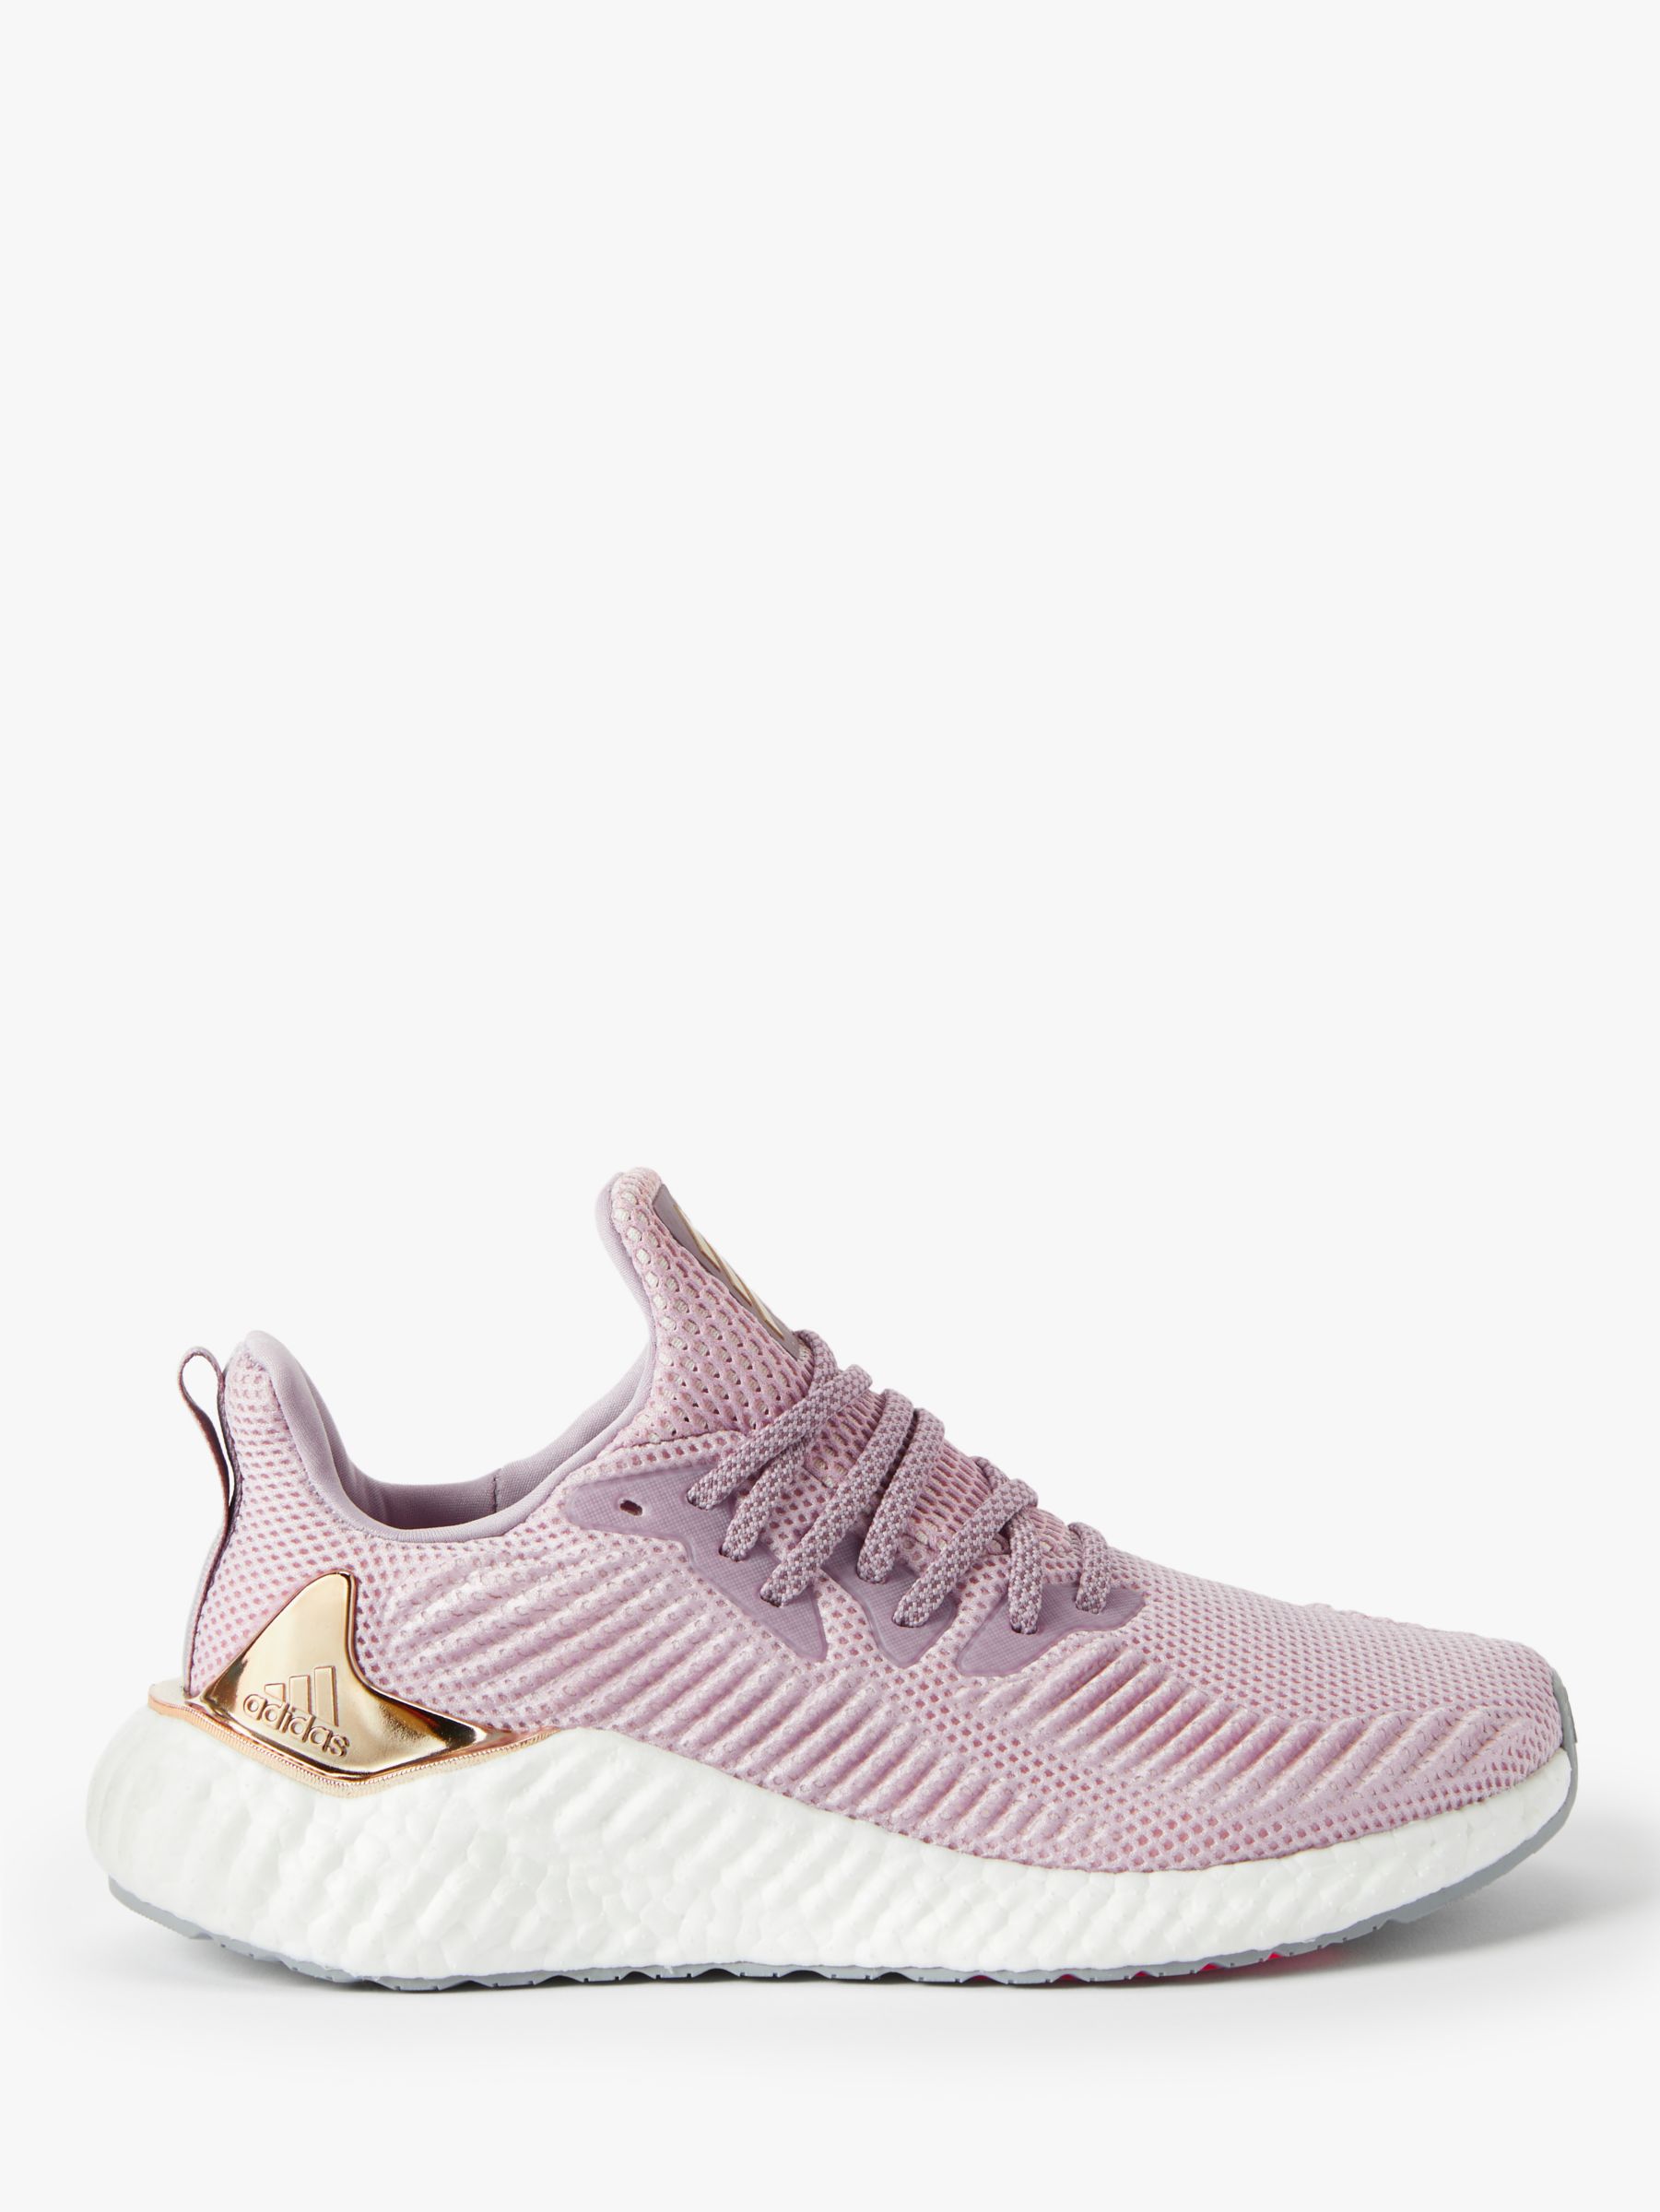 adidas alpha boost womens orchid tint